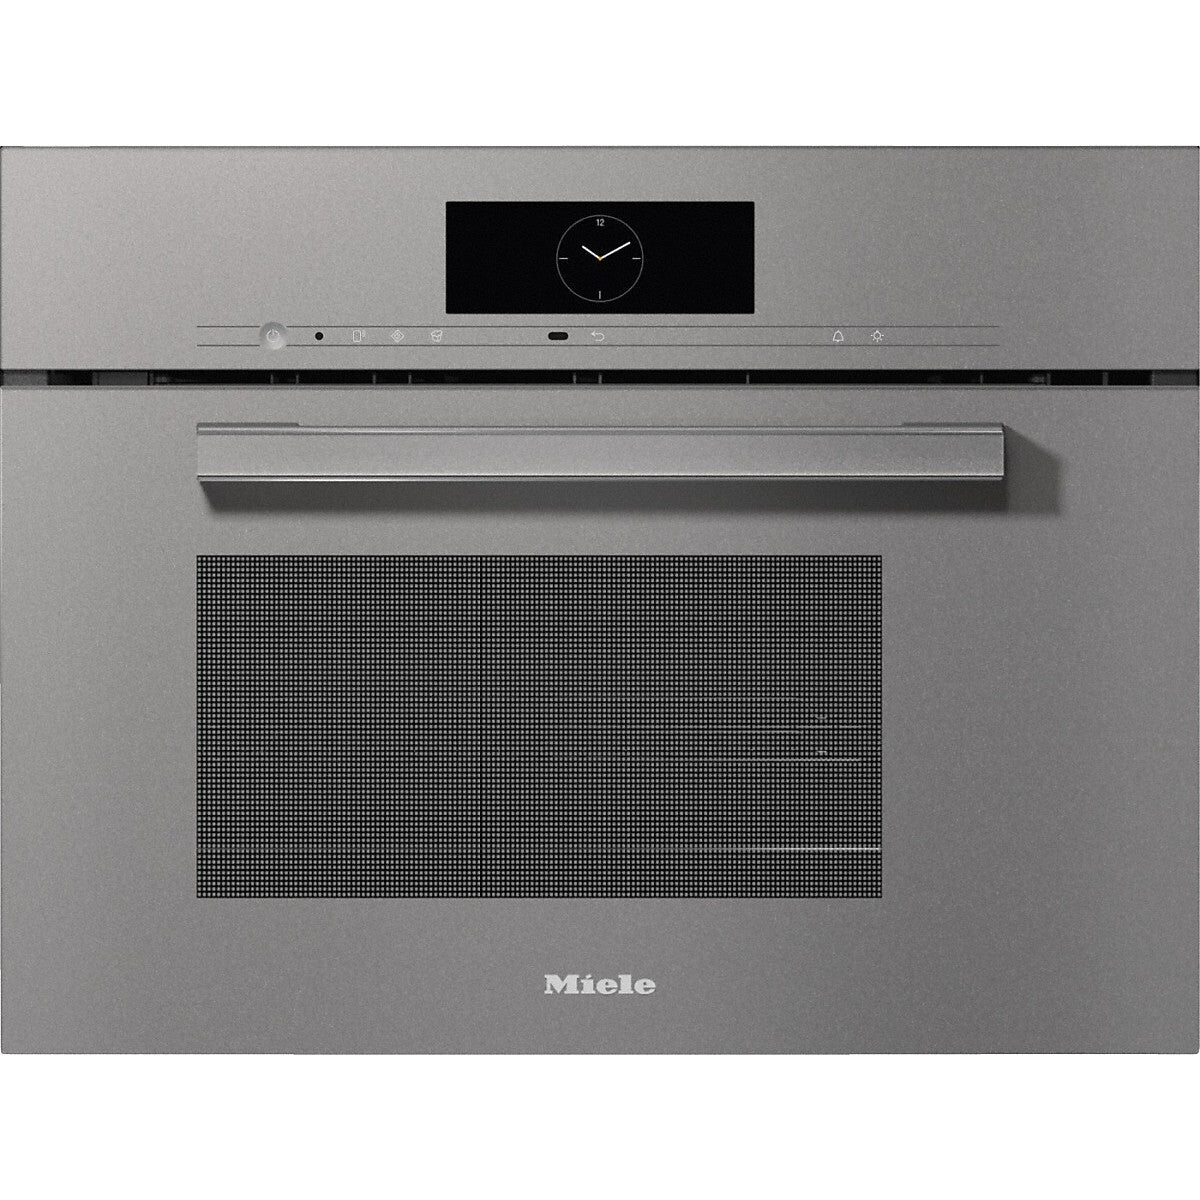 Miele 45cm Steam Oven with Microwave DGM 7845 Graphite Grey